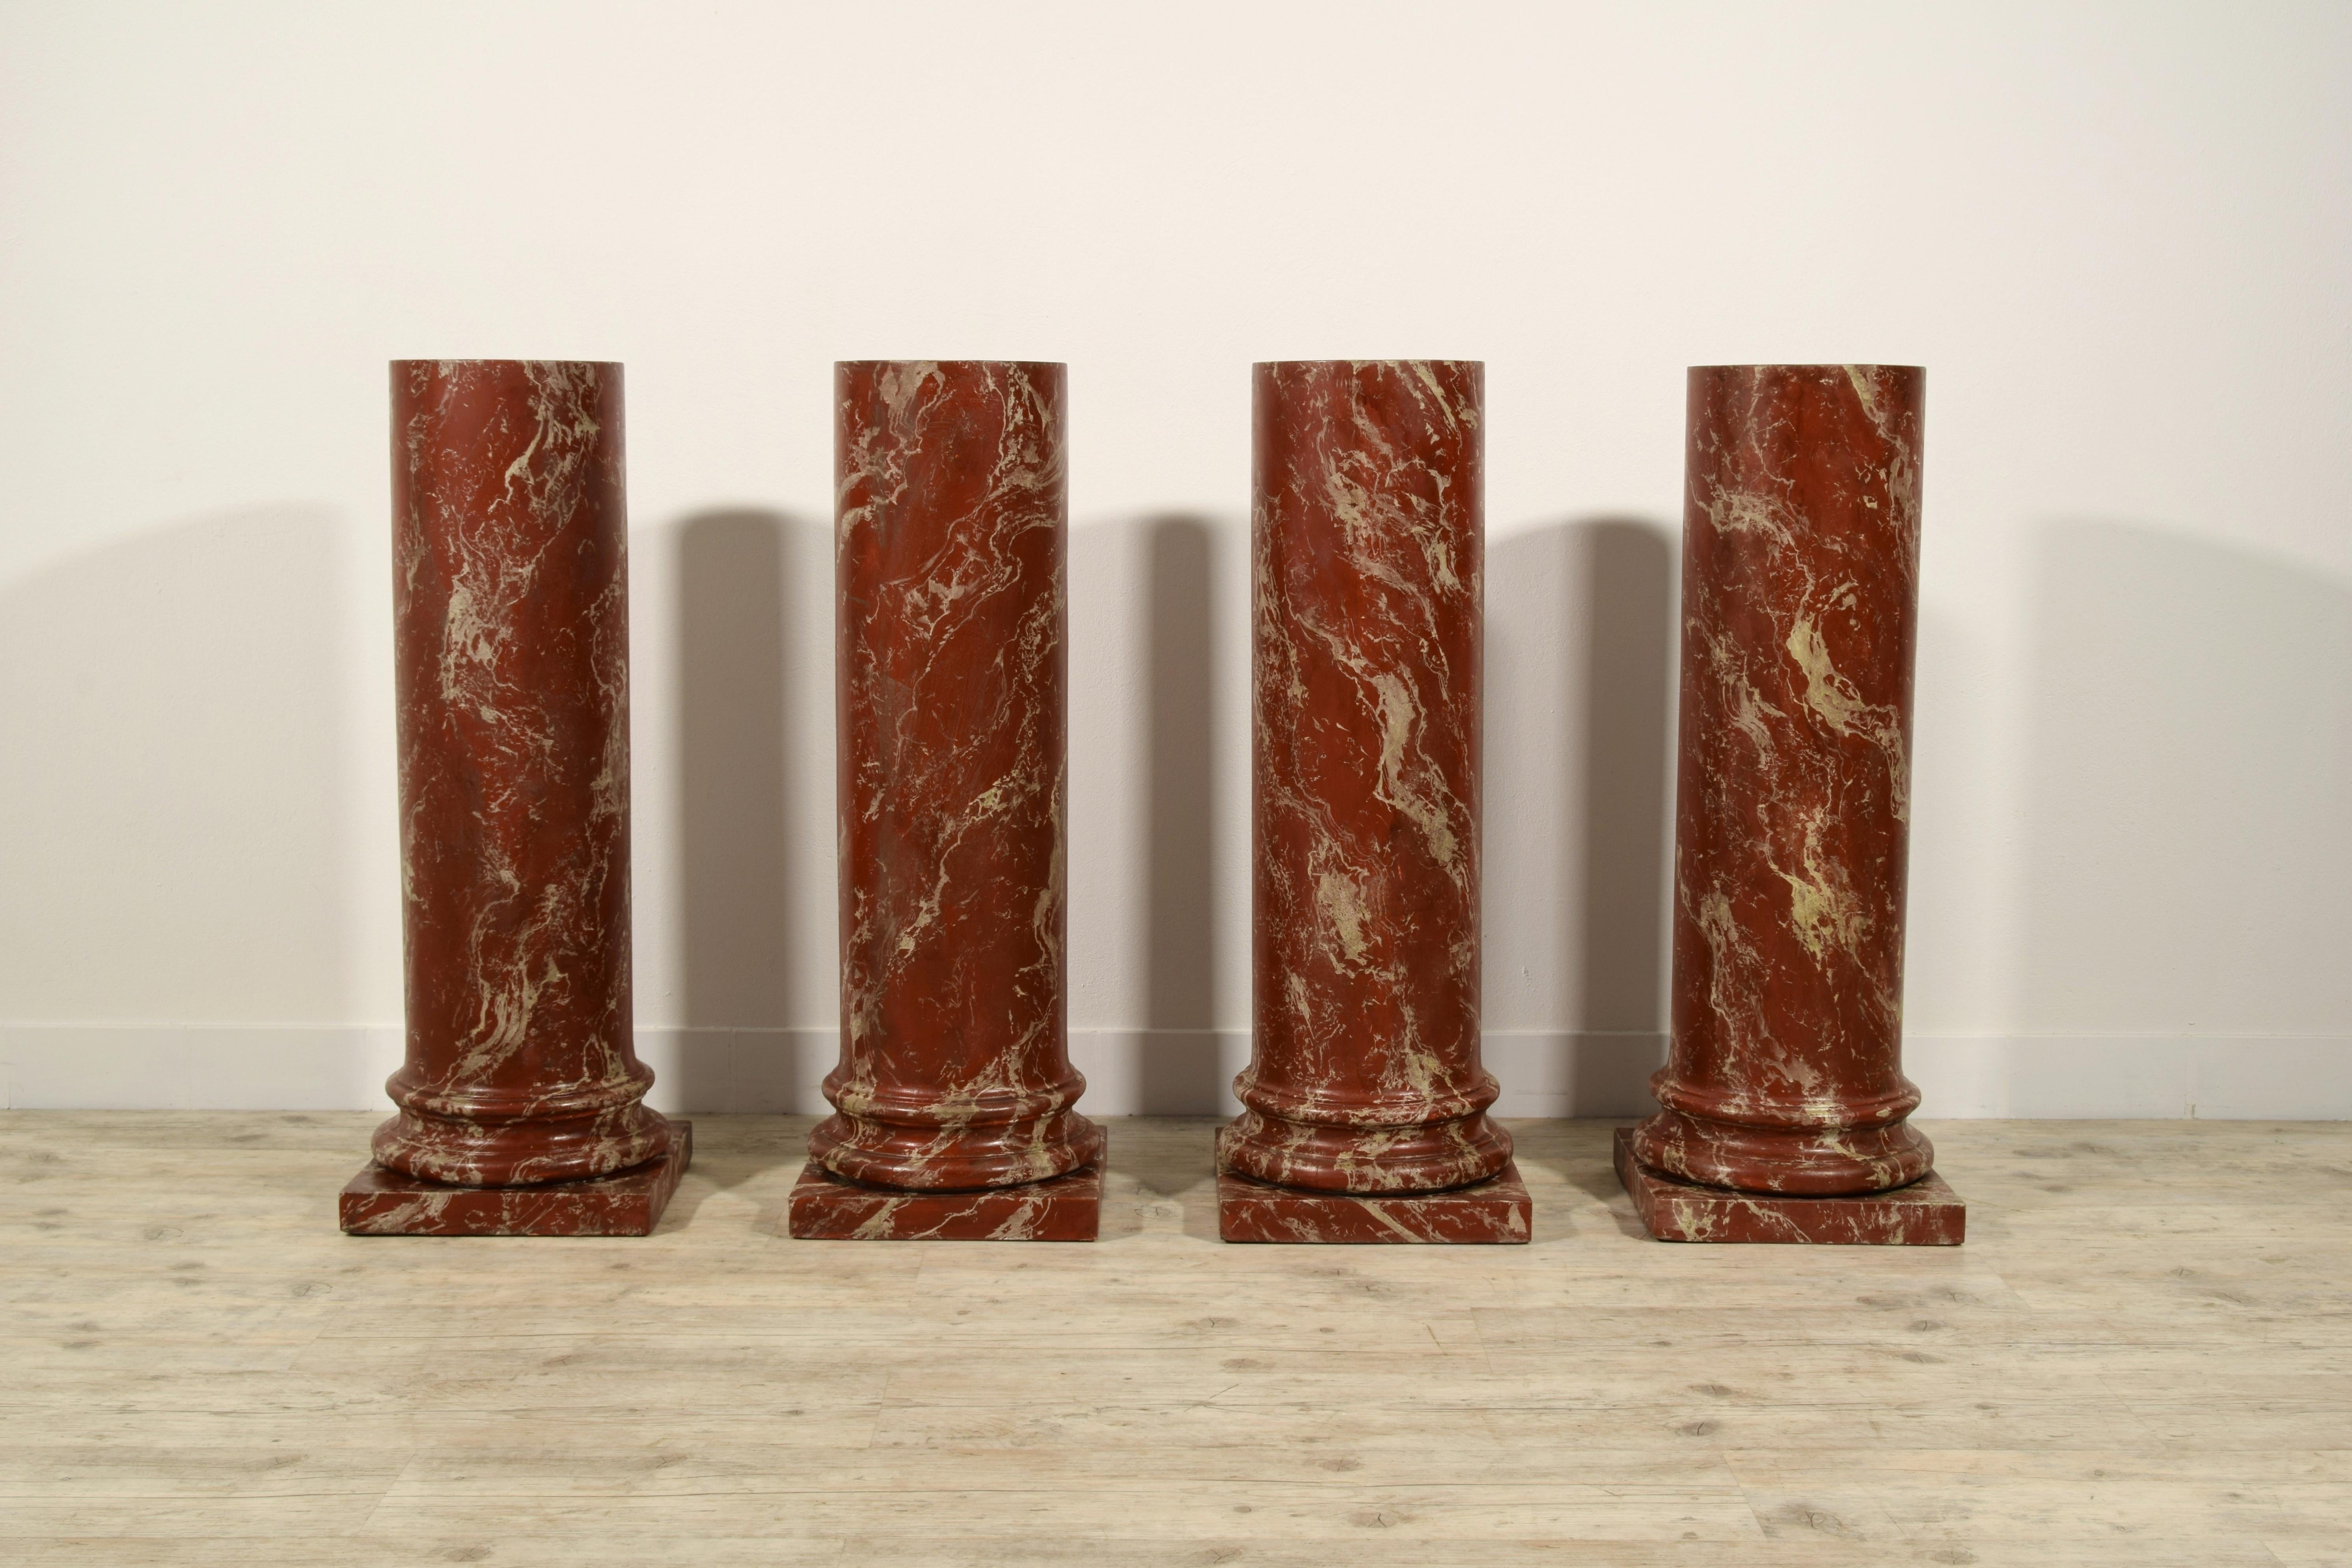 19th century, four Italian wood columns lacquered in Faux Rosso di Verona marble

Measurements: cm H 101,5 x base 36 x 36 - base diameter 27 cm
The four columns were in the early nineteenth century carved wood. They are composed of the stem of a